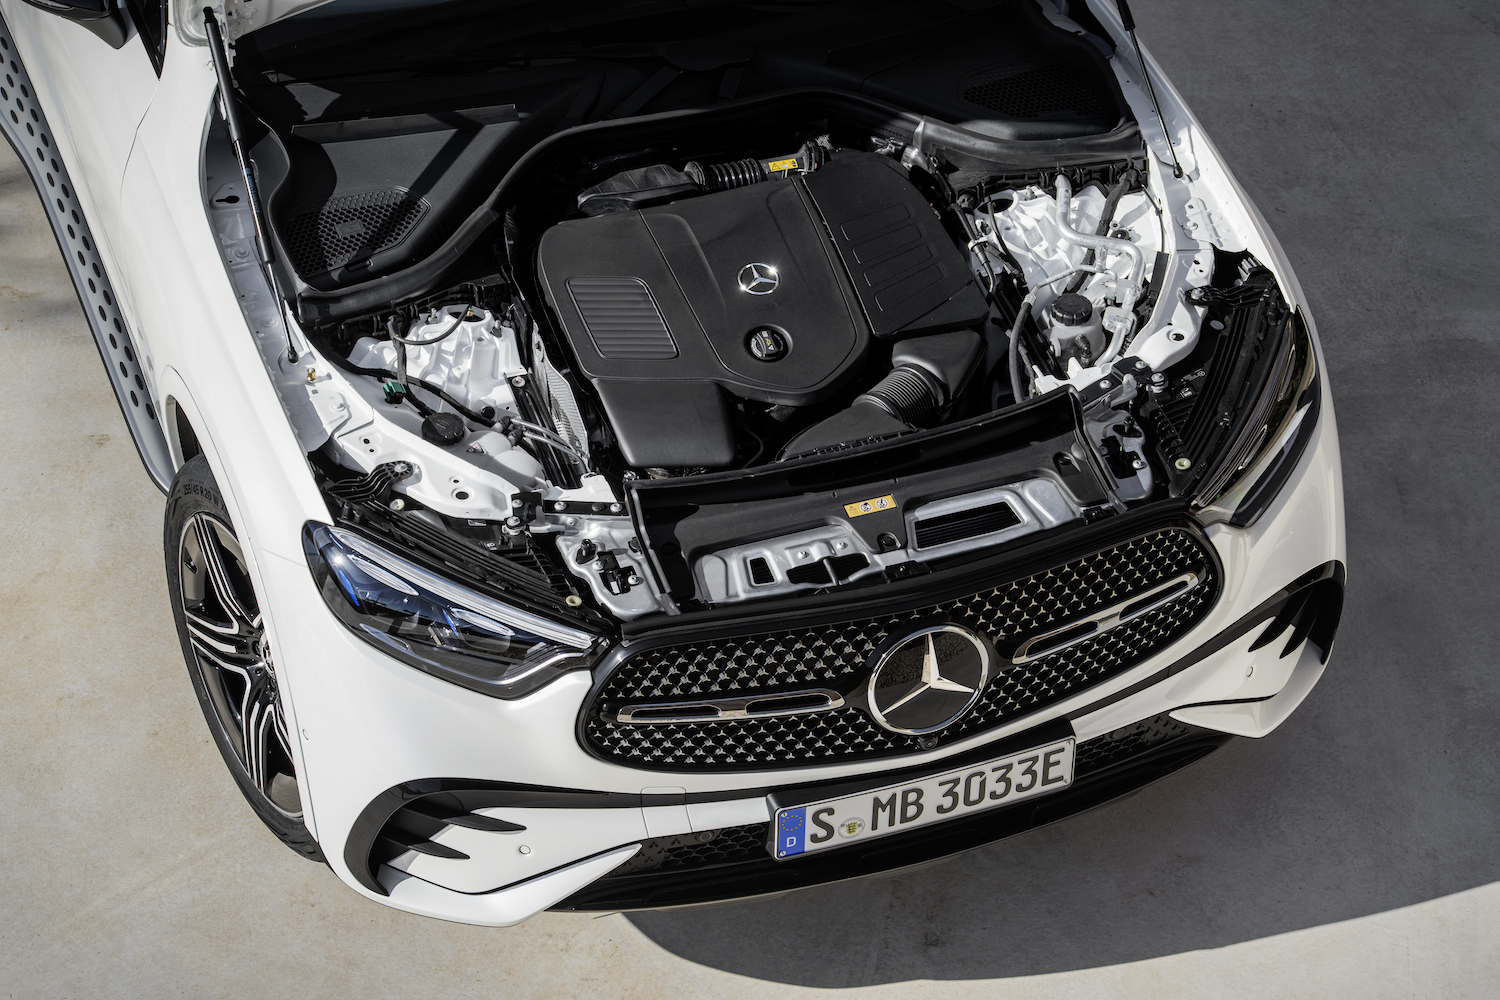 Overhead shot of the engine in the 2023 Mercedes-Benz GLC parked on a road.